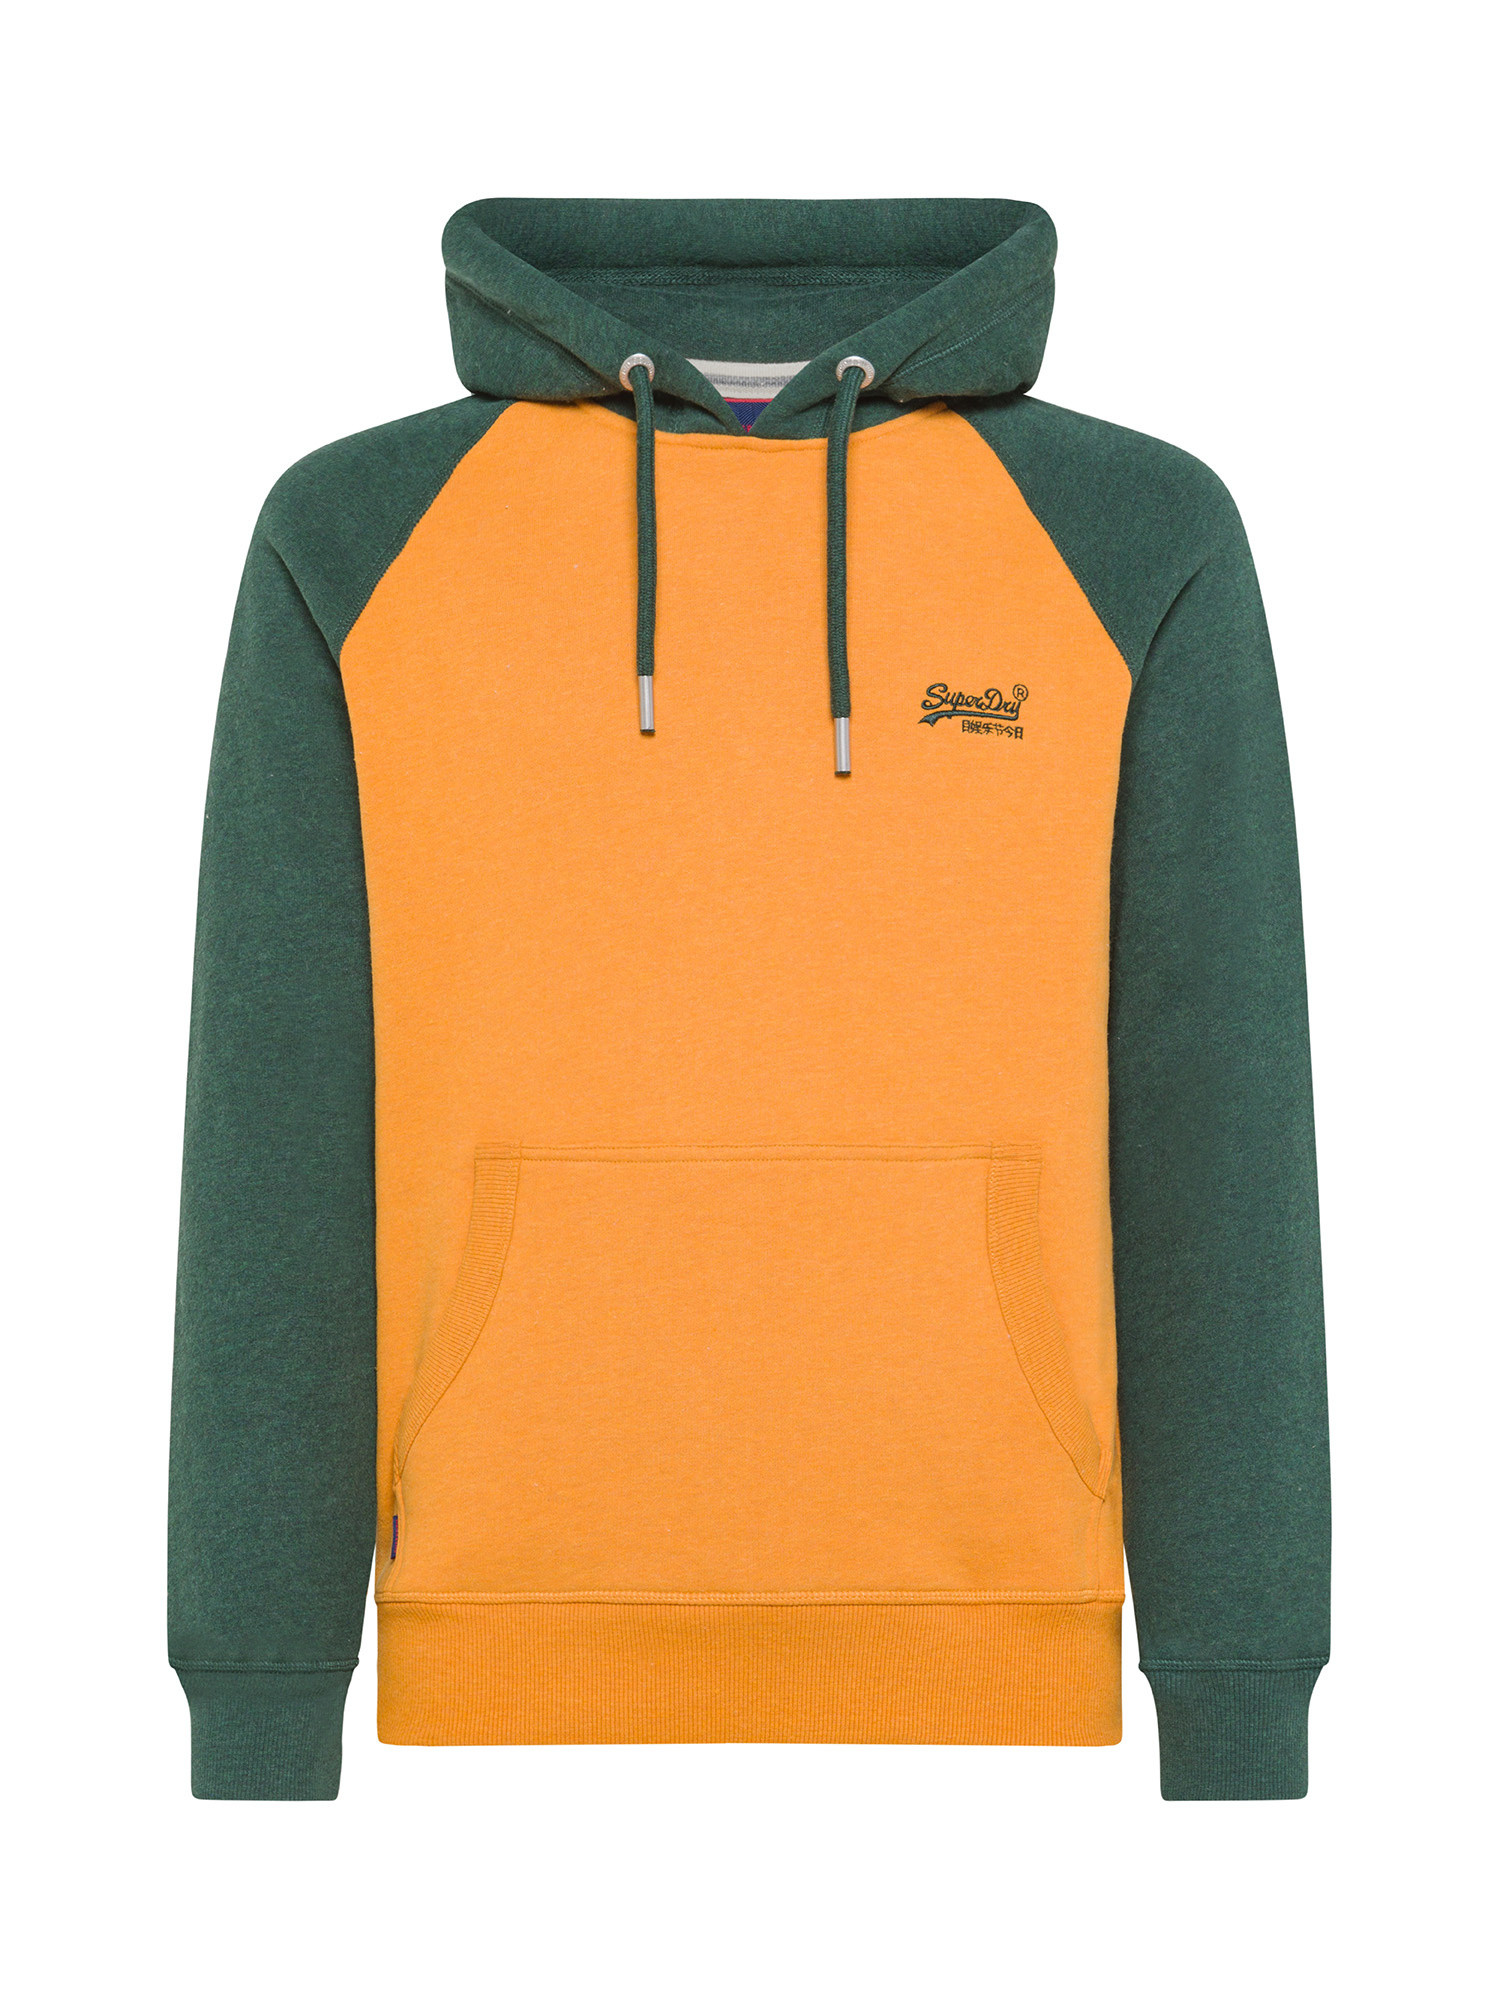 Superdry - Two-tone sweatshirt with logo, Yellow, large image number 0